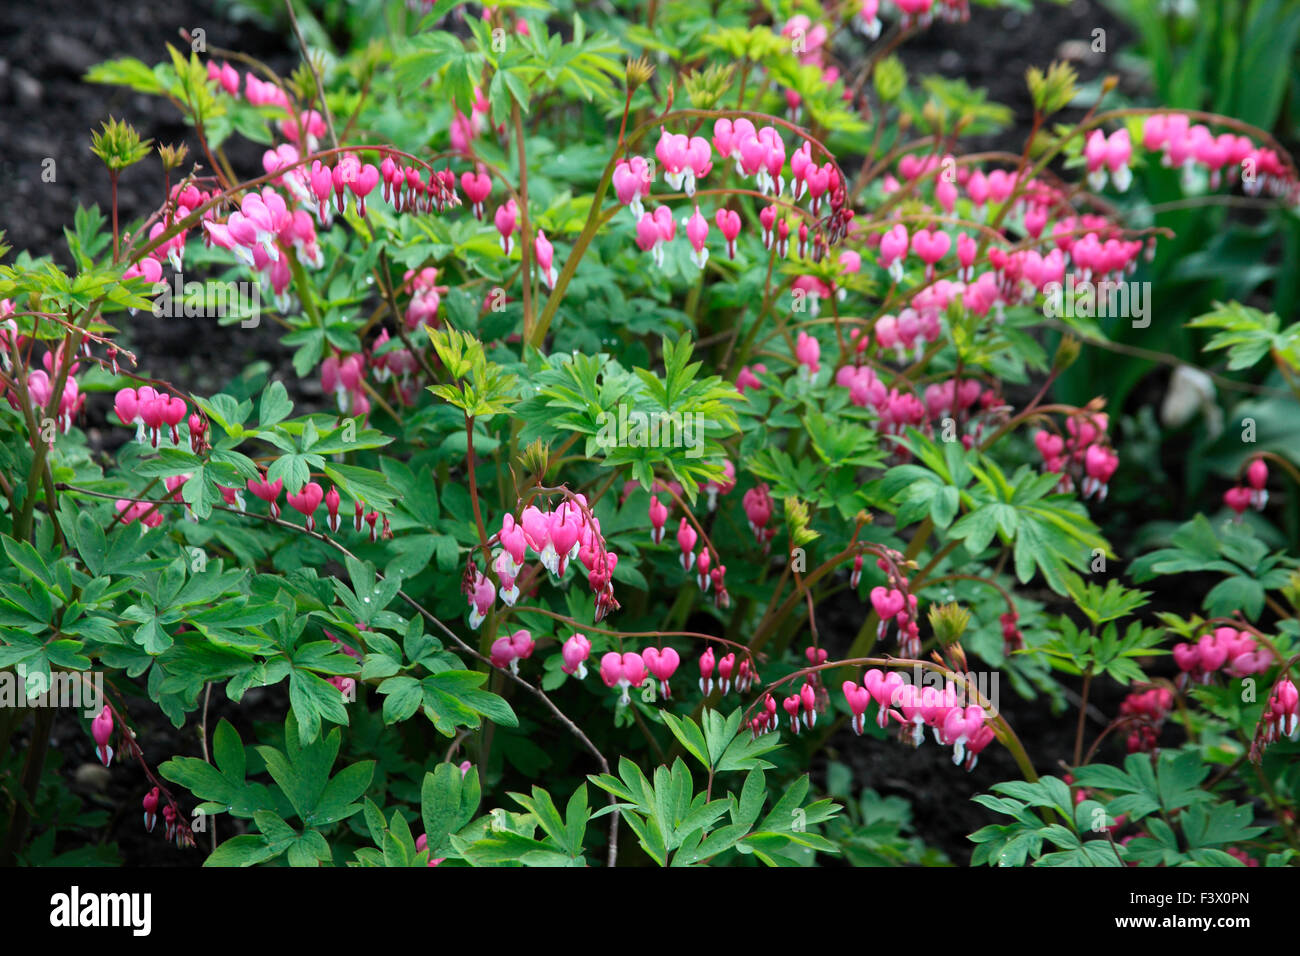 Dicentra spectabilis plant in fllower Stock Photo